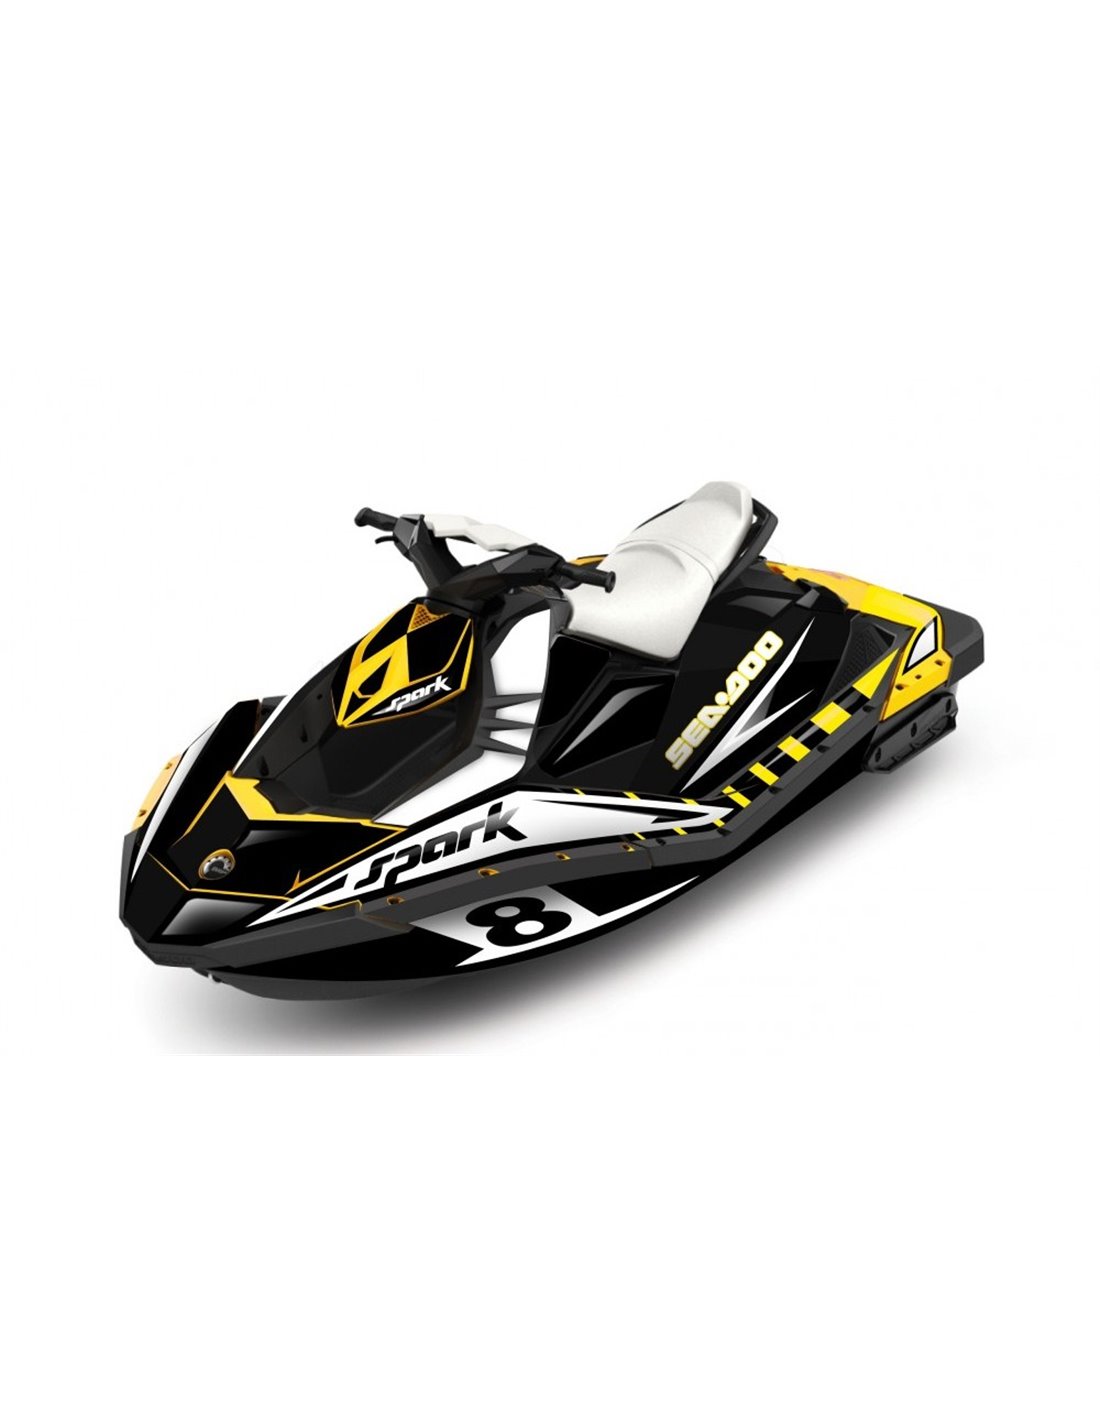 SEADOO SPARK TRIXX for 2up 3up jet ski graphics decals kit watercraft stickers 